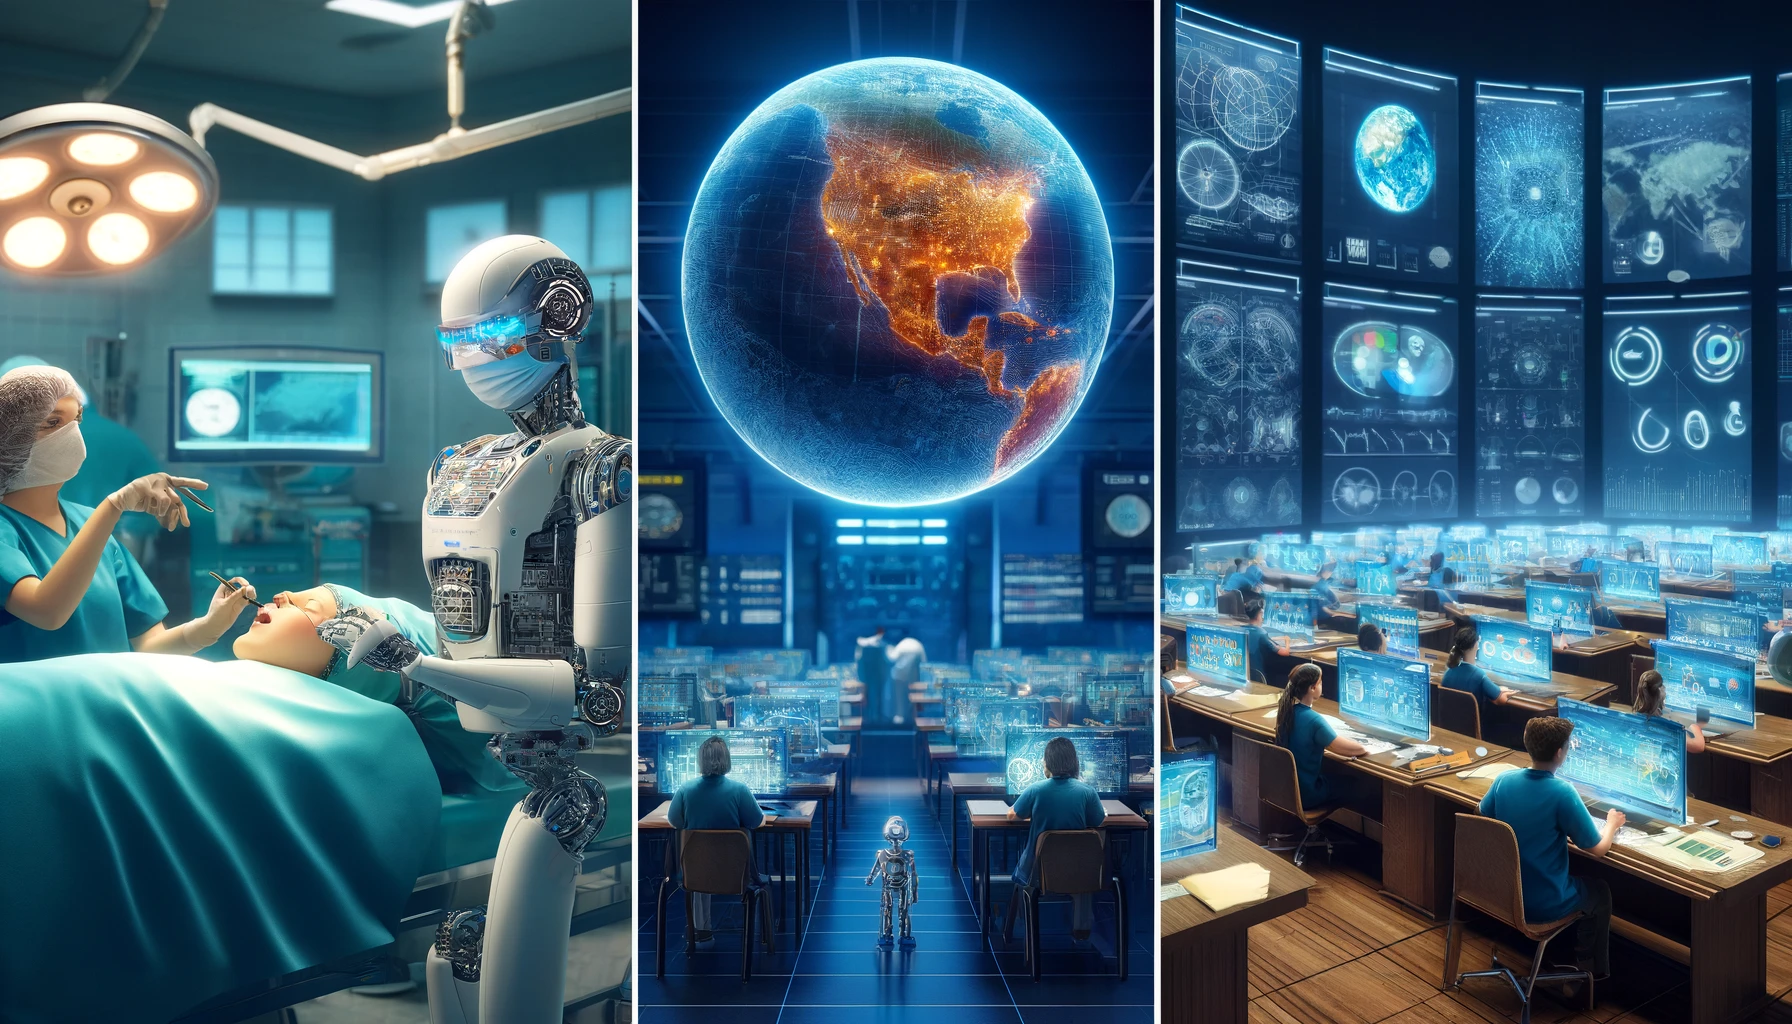 A-series-of-three-impactful-images-depicting-how-artificial-intelligence-is-affecting-the-world_-1.-__Healthcare___-A-modern-hospital-room-where-a-rob.